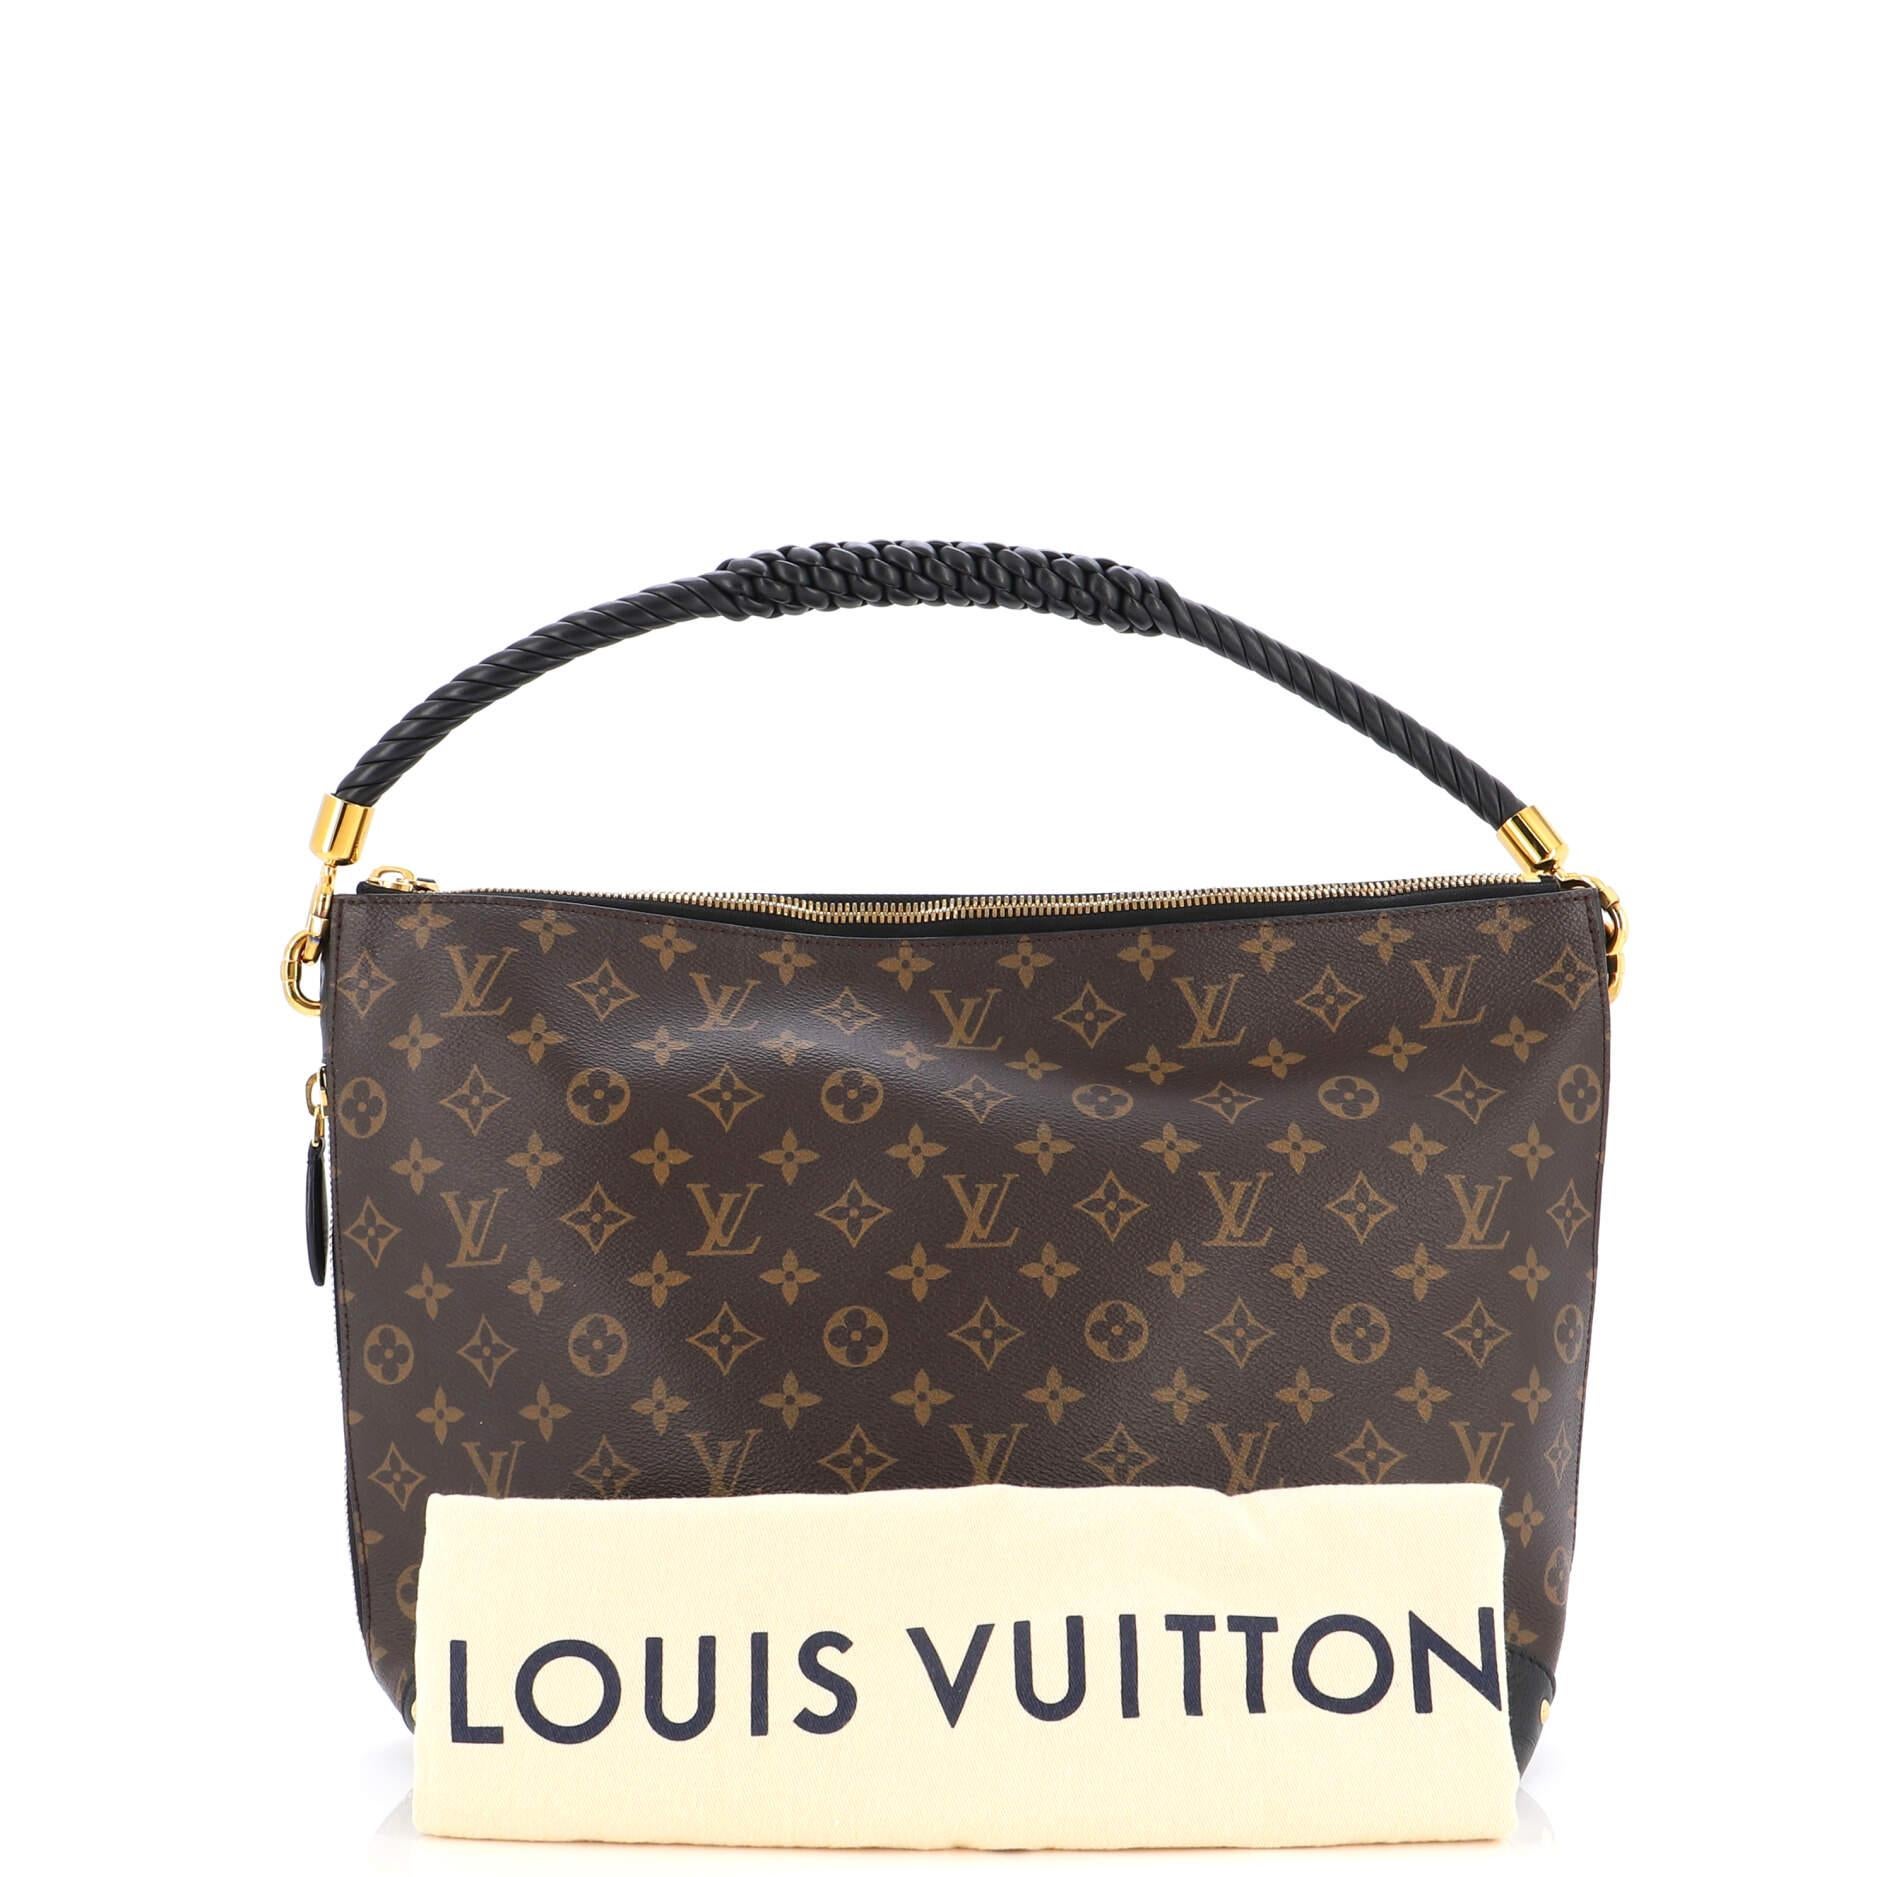 3X LOUIS VUITTON SMALL Shopping Bag WITH BLUE HANDLE NEW Style BAG 5.5 X  4.5 X 3